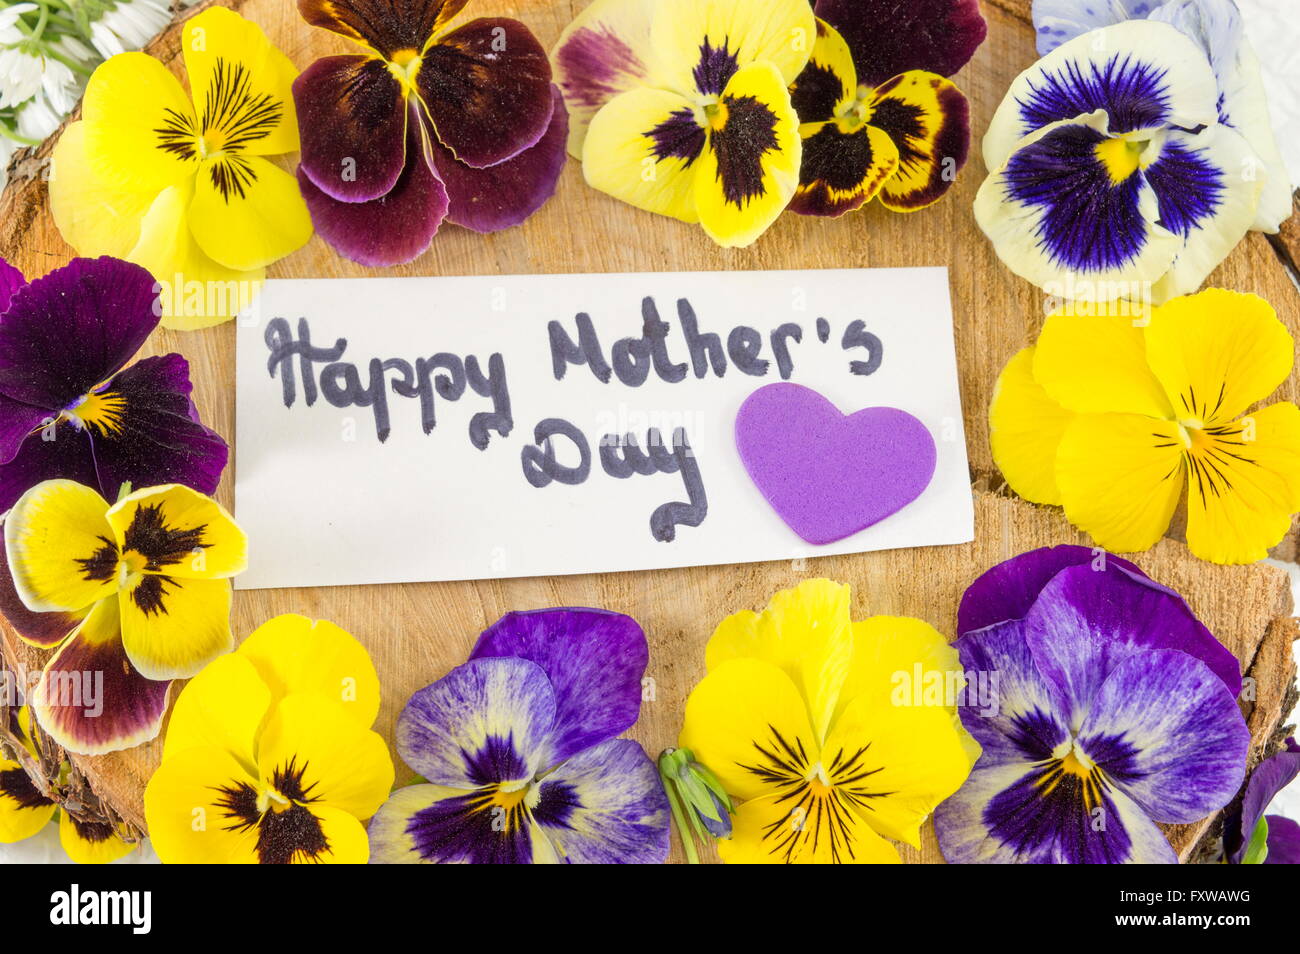 Happy mothers day card with violet and yellow flowers Stock Photo